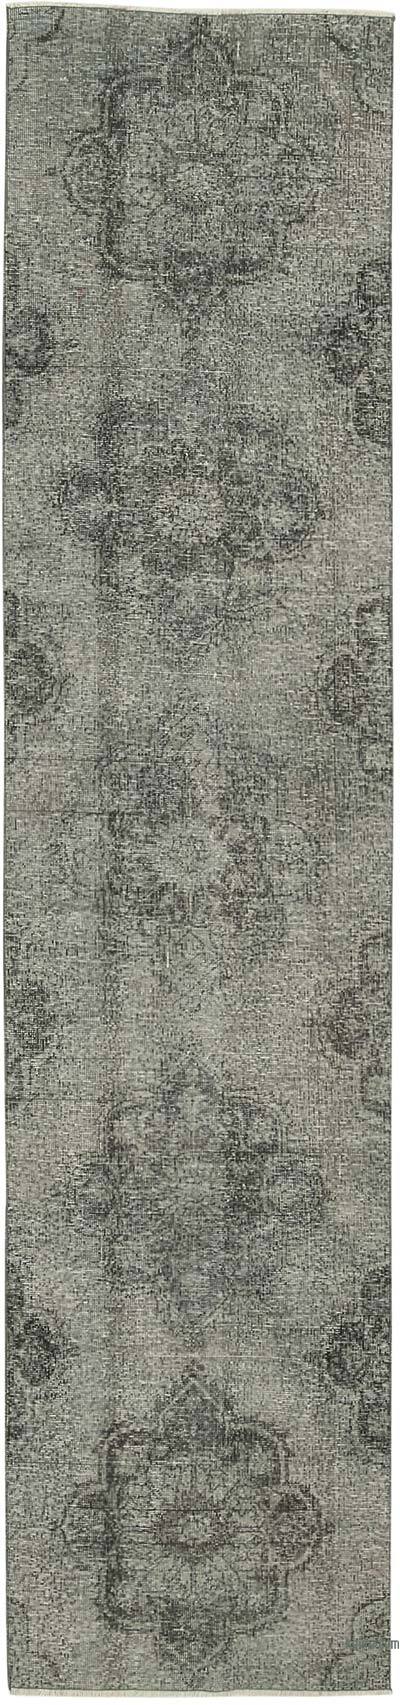 Grey Over-dyed Turkish Vintage Runner Rug - 2' 8" x 11' 4" (32 in. x 136 in.)